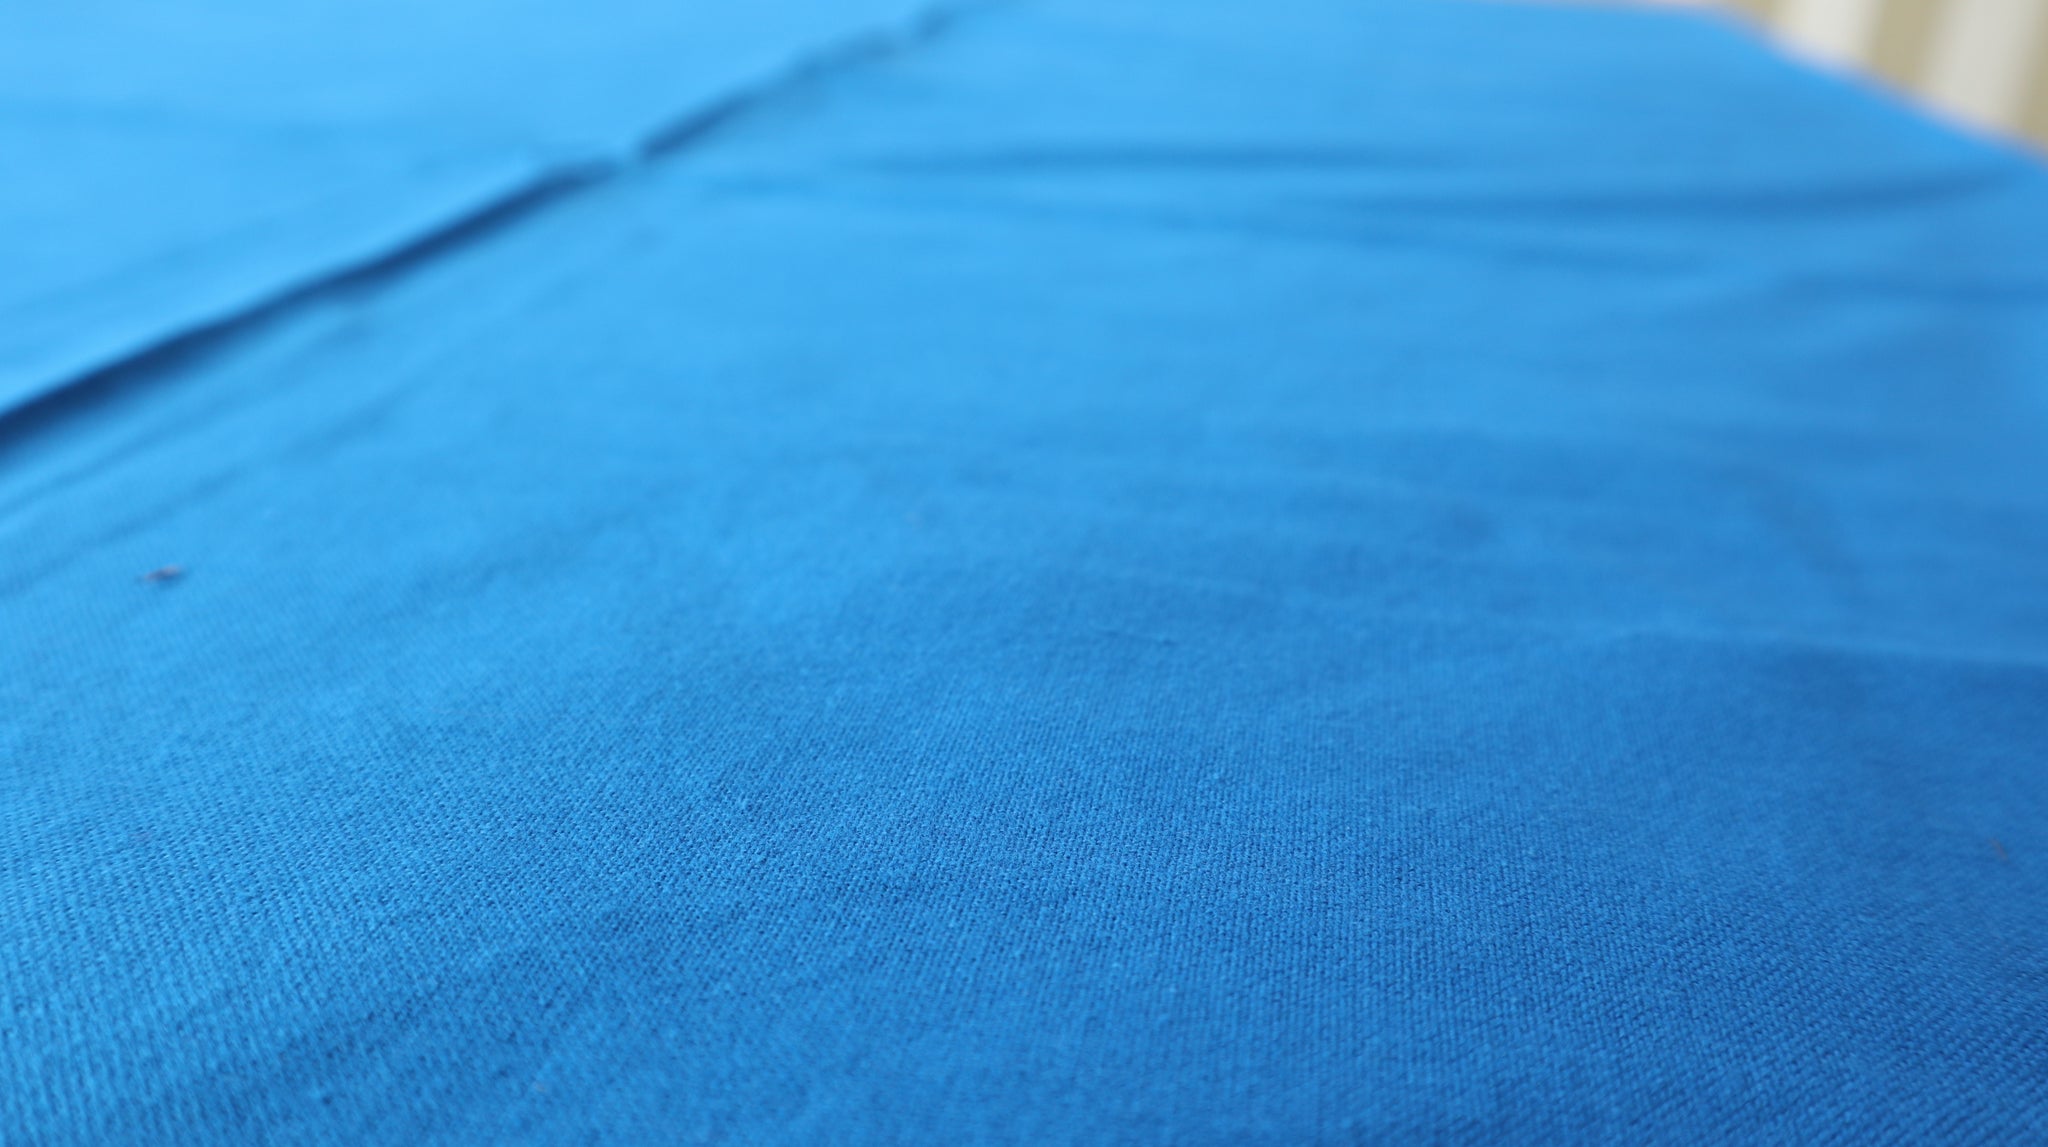 Fair trade ethical handwoven table cloth in bright blue colouring